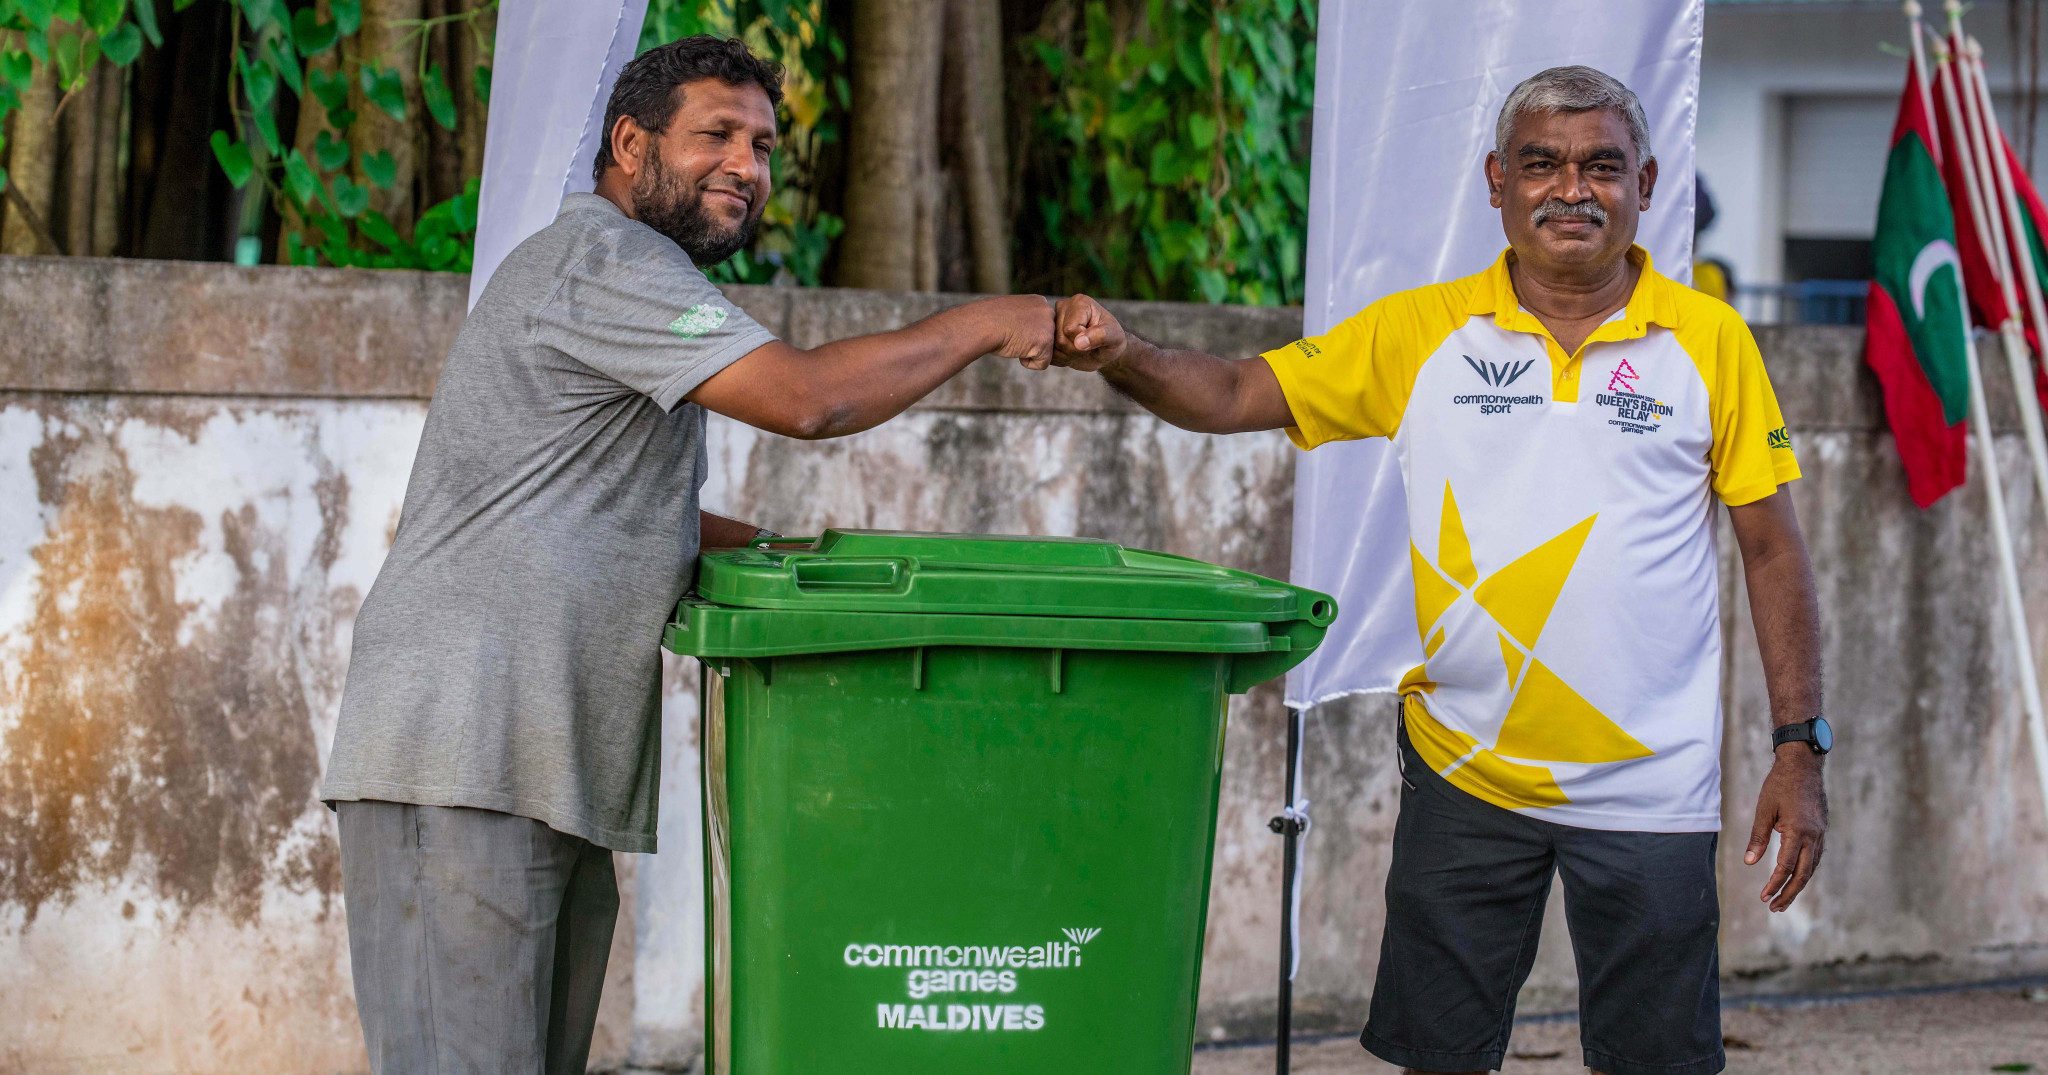 Bins were given out by Commonwealth Games Maldives to coincide with the arrival of the Queen's Baton Relay ©Twitter/Birmingham2022